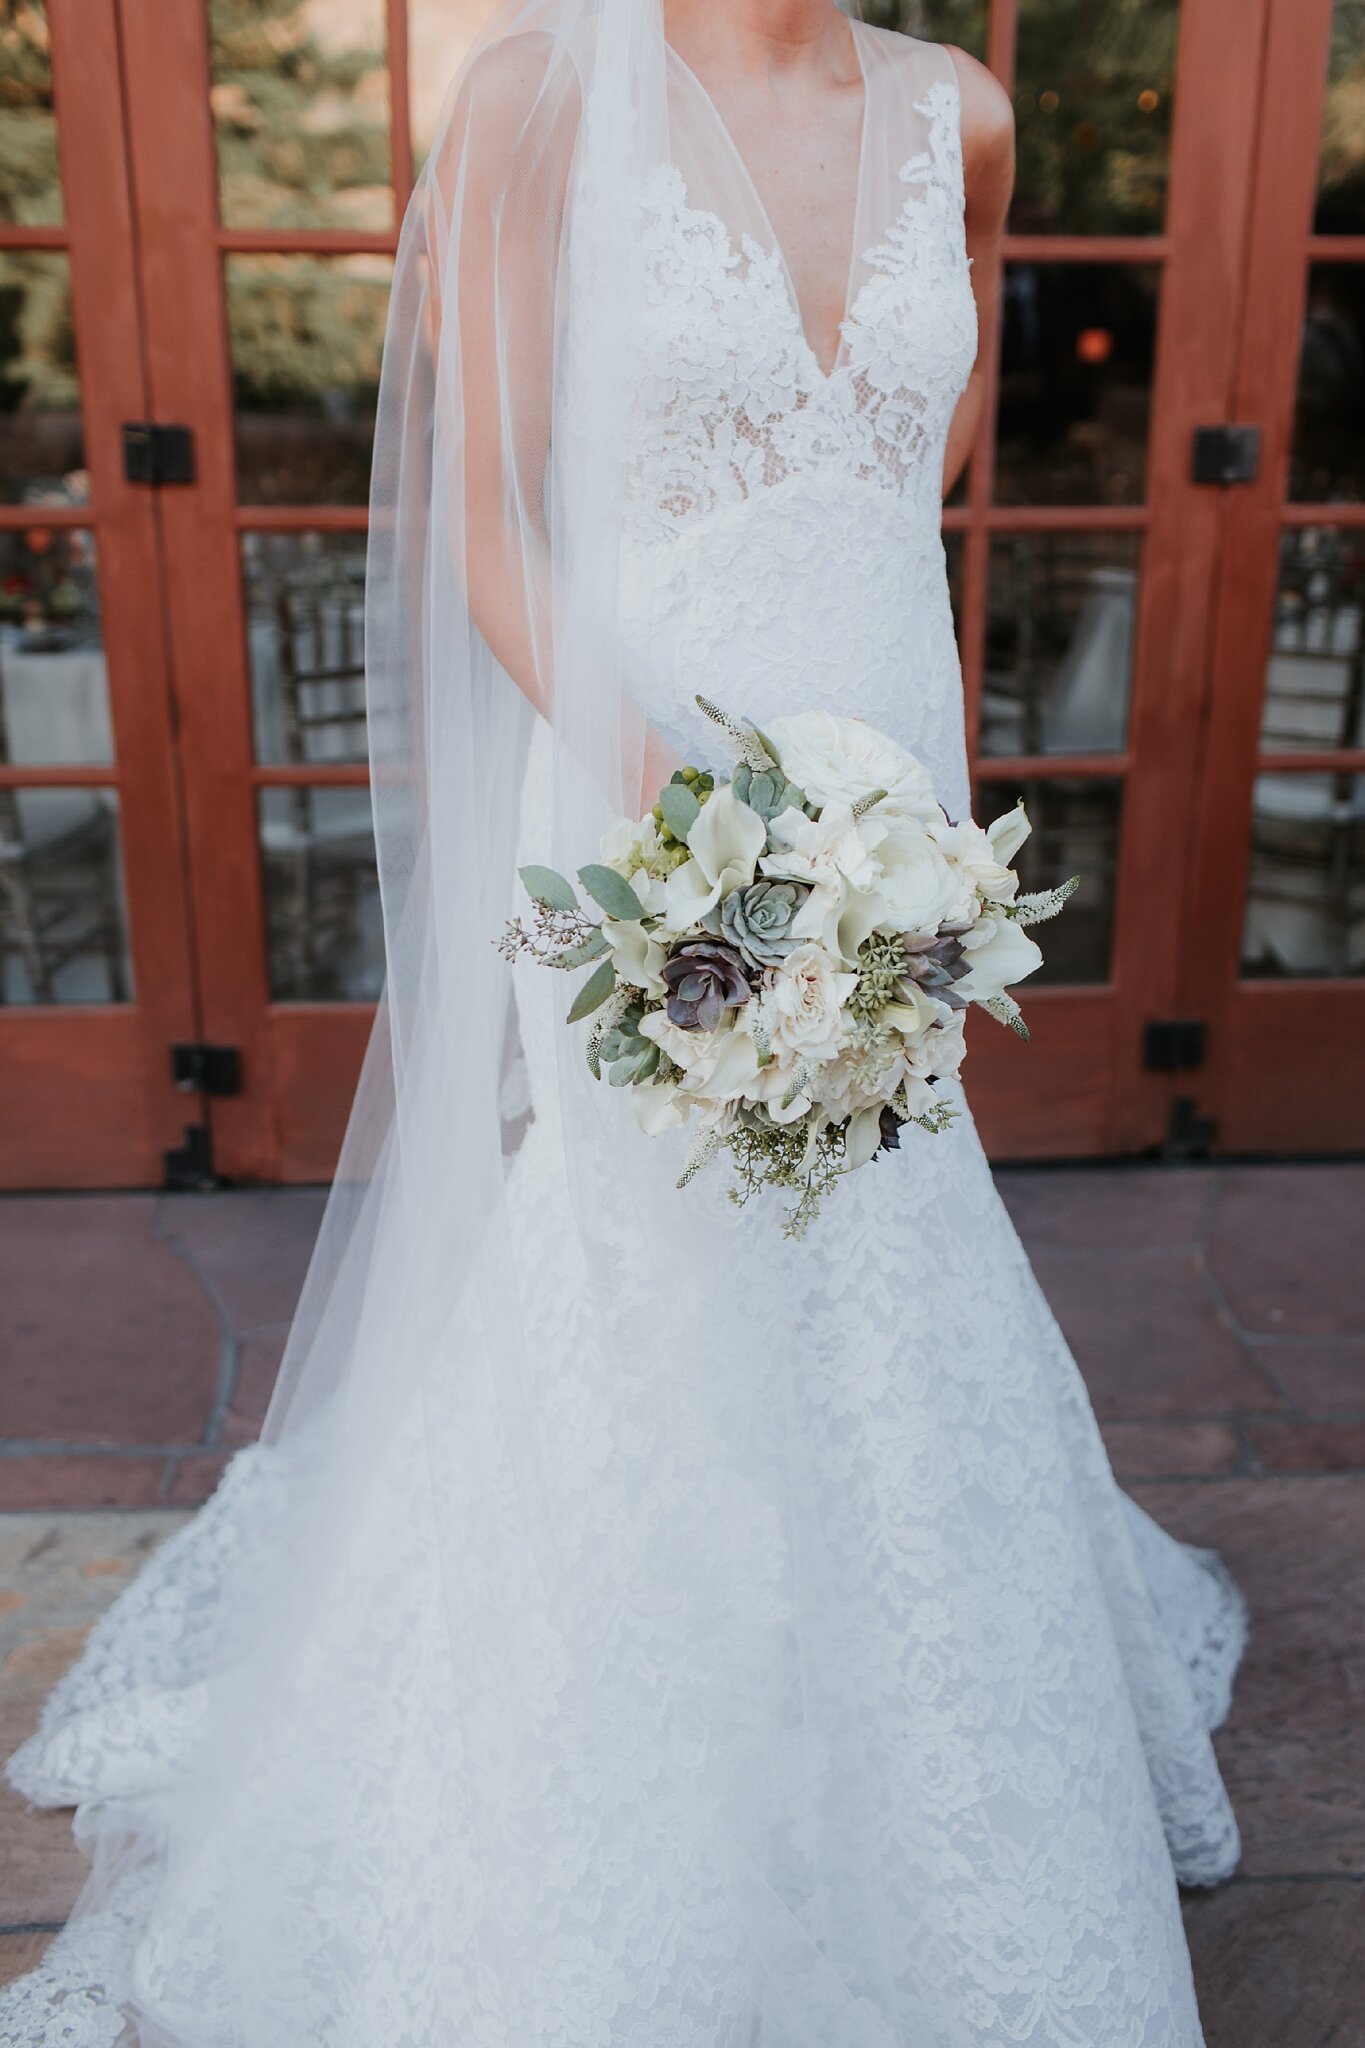 Alicia+lucia+photography+-+albuquerque+wedding+photographer+-+santa+fe+wedding+photography+-+new+mexico+wedding+photographer+-+new+mexico+wedding+-+wedding+gowns+-+trumpet+wedding+gown+-+bridal+gowns_0034.jpg